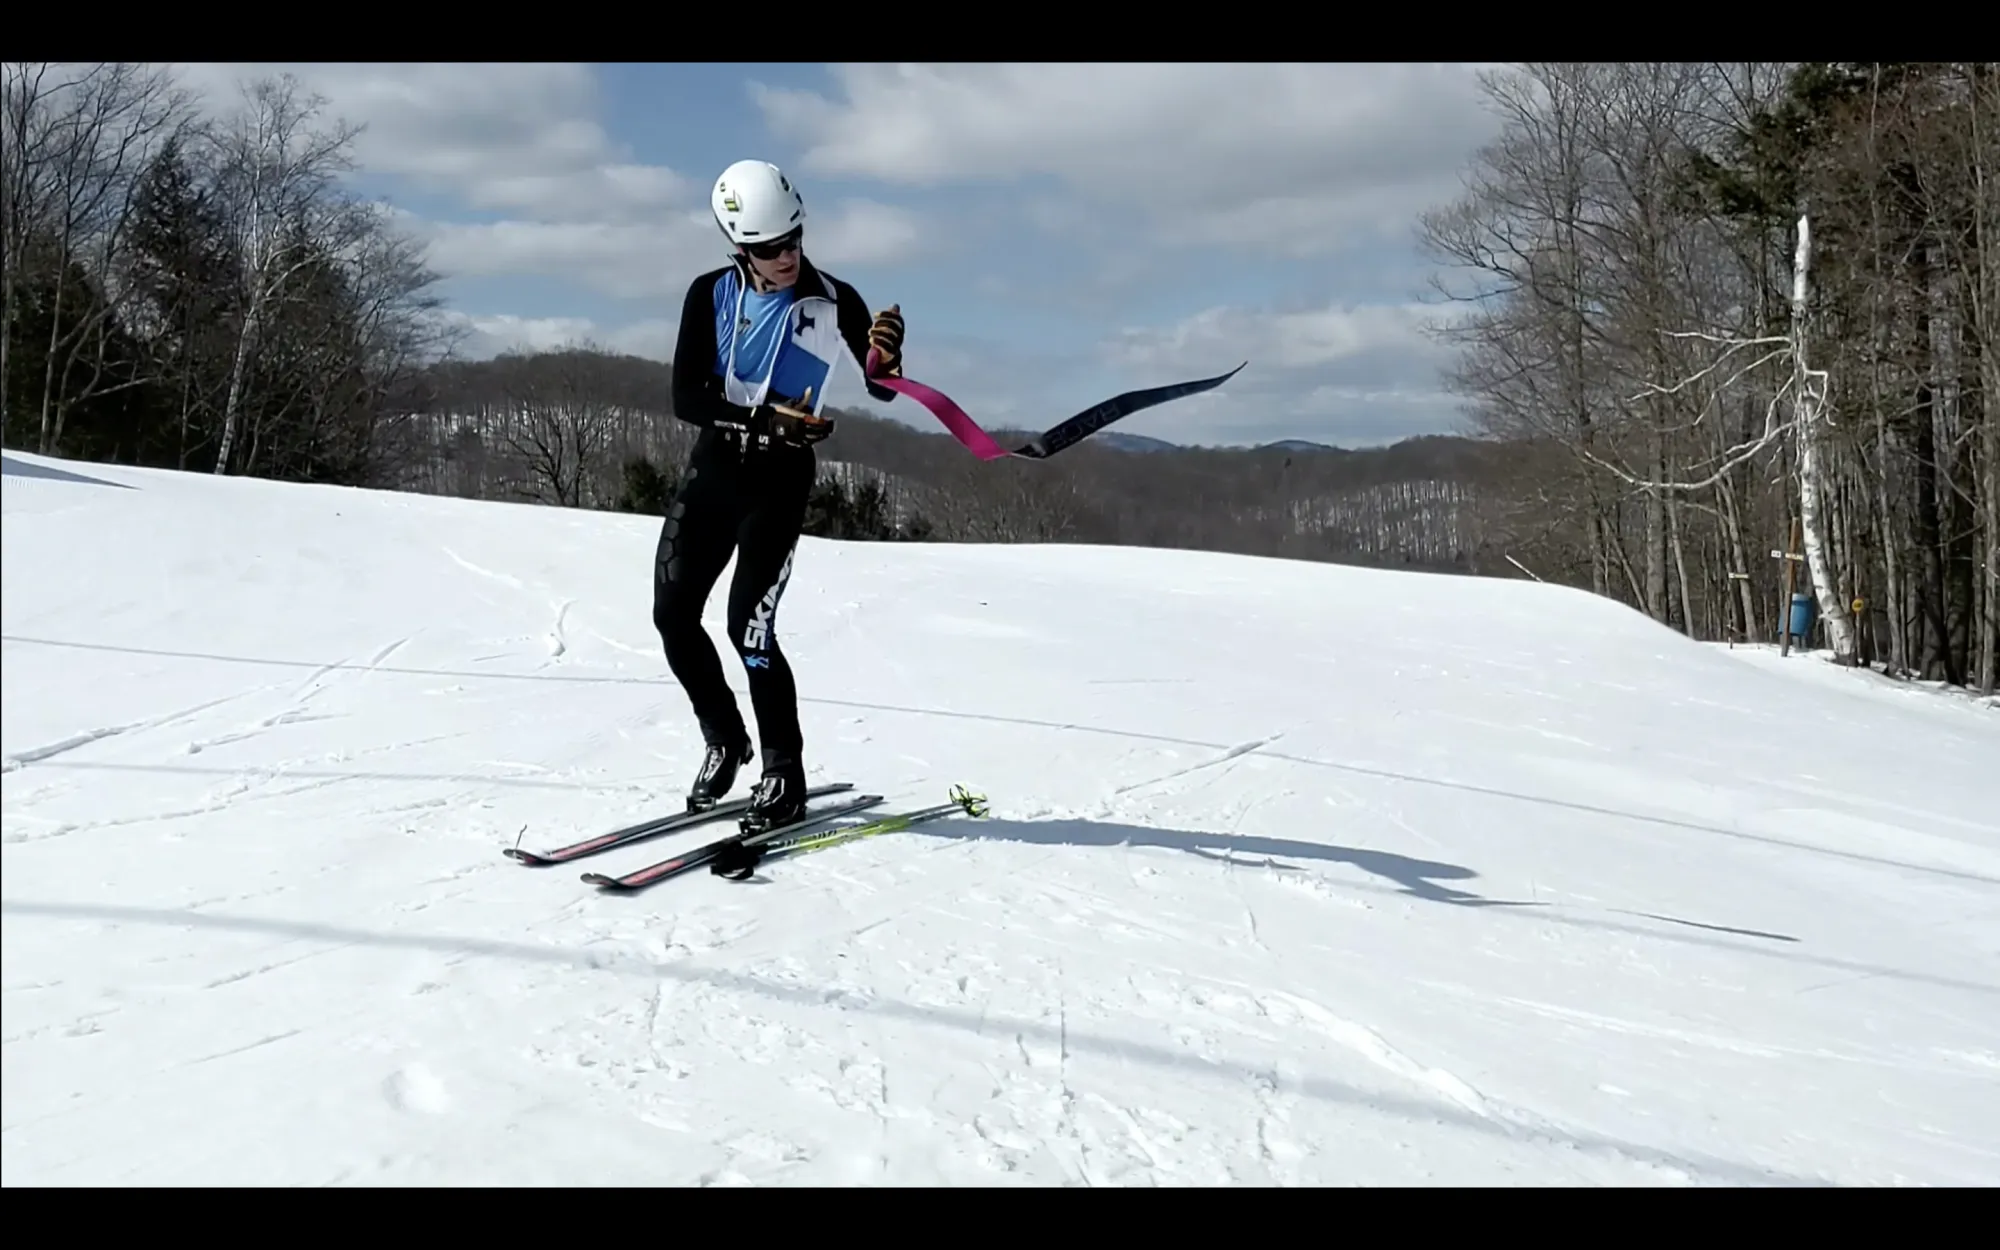 A feature image of the skin-to-ski transition